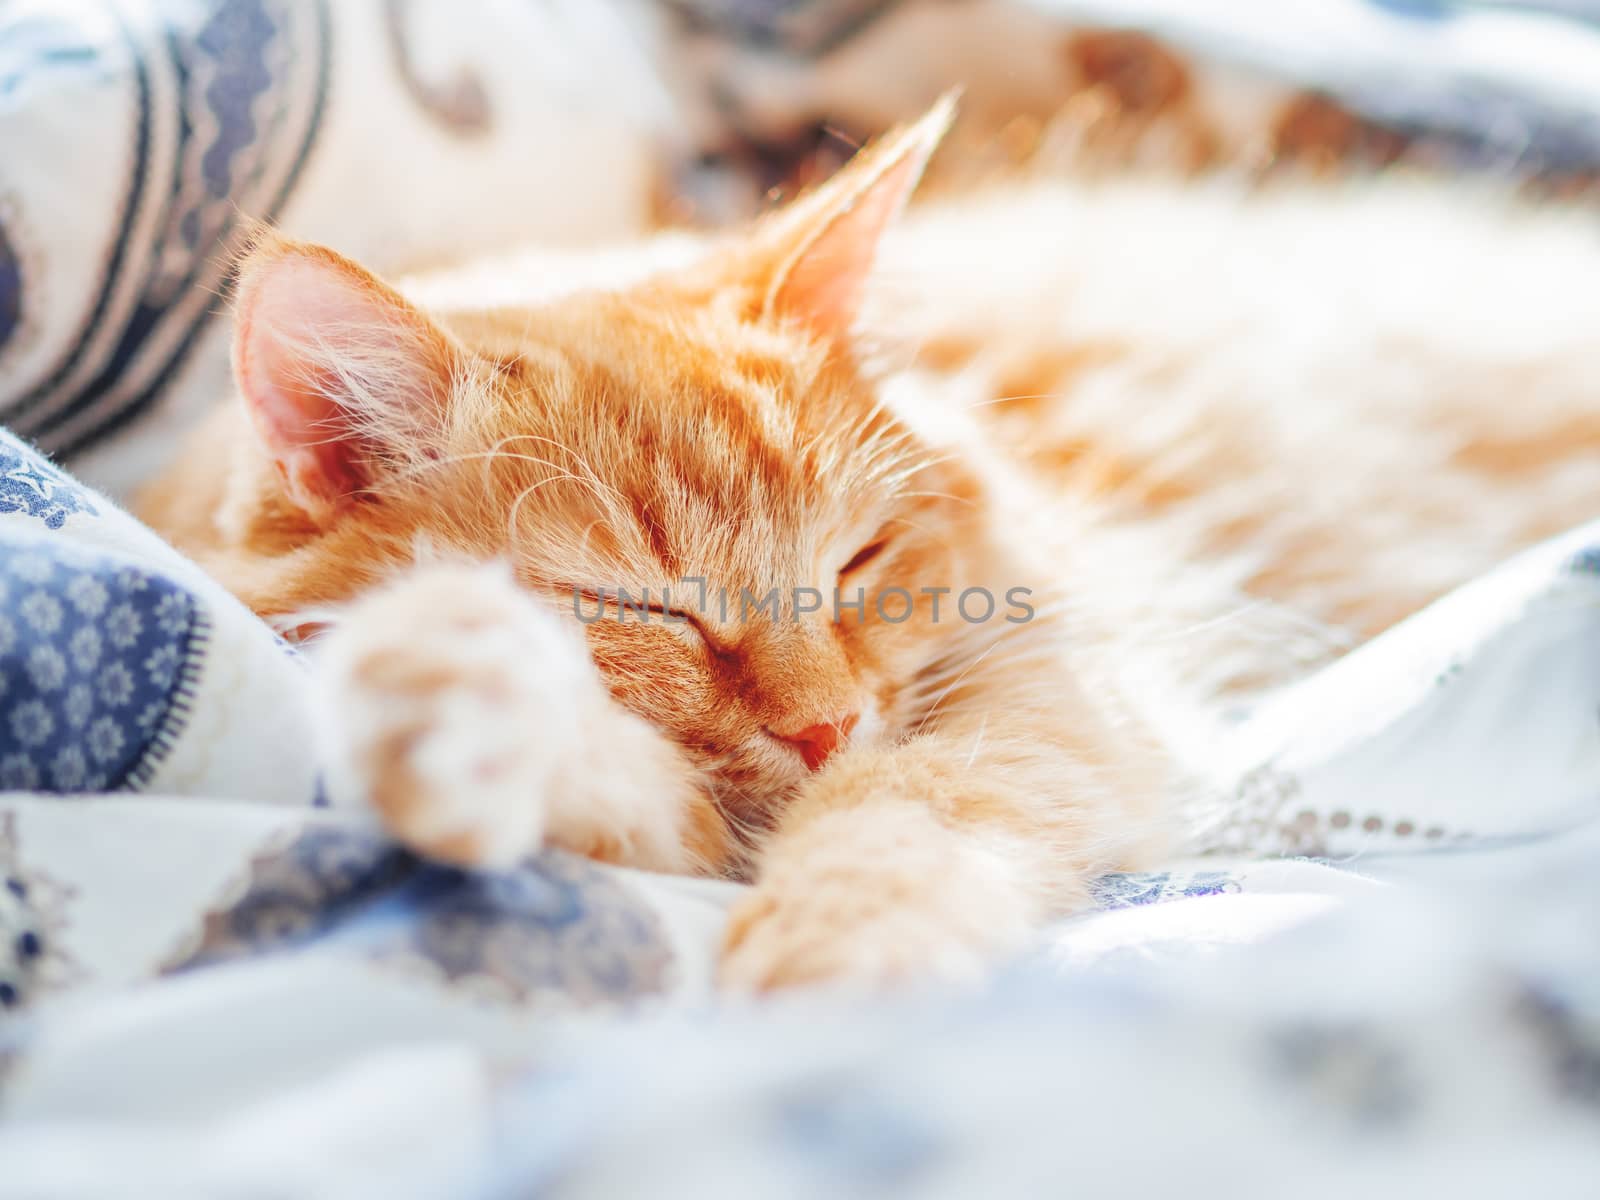 Cute ginger cat sleeping in bed. Fluffy pet in cozy home background.